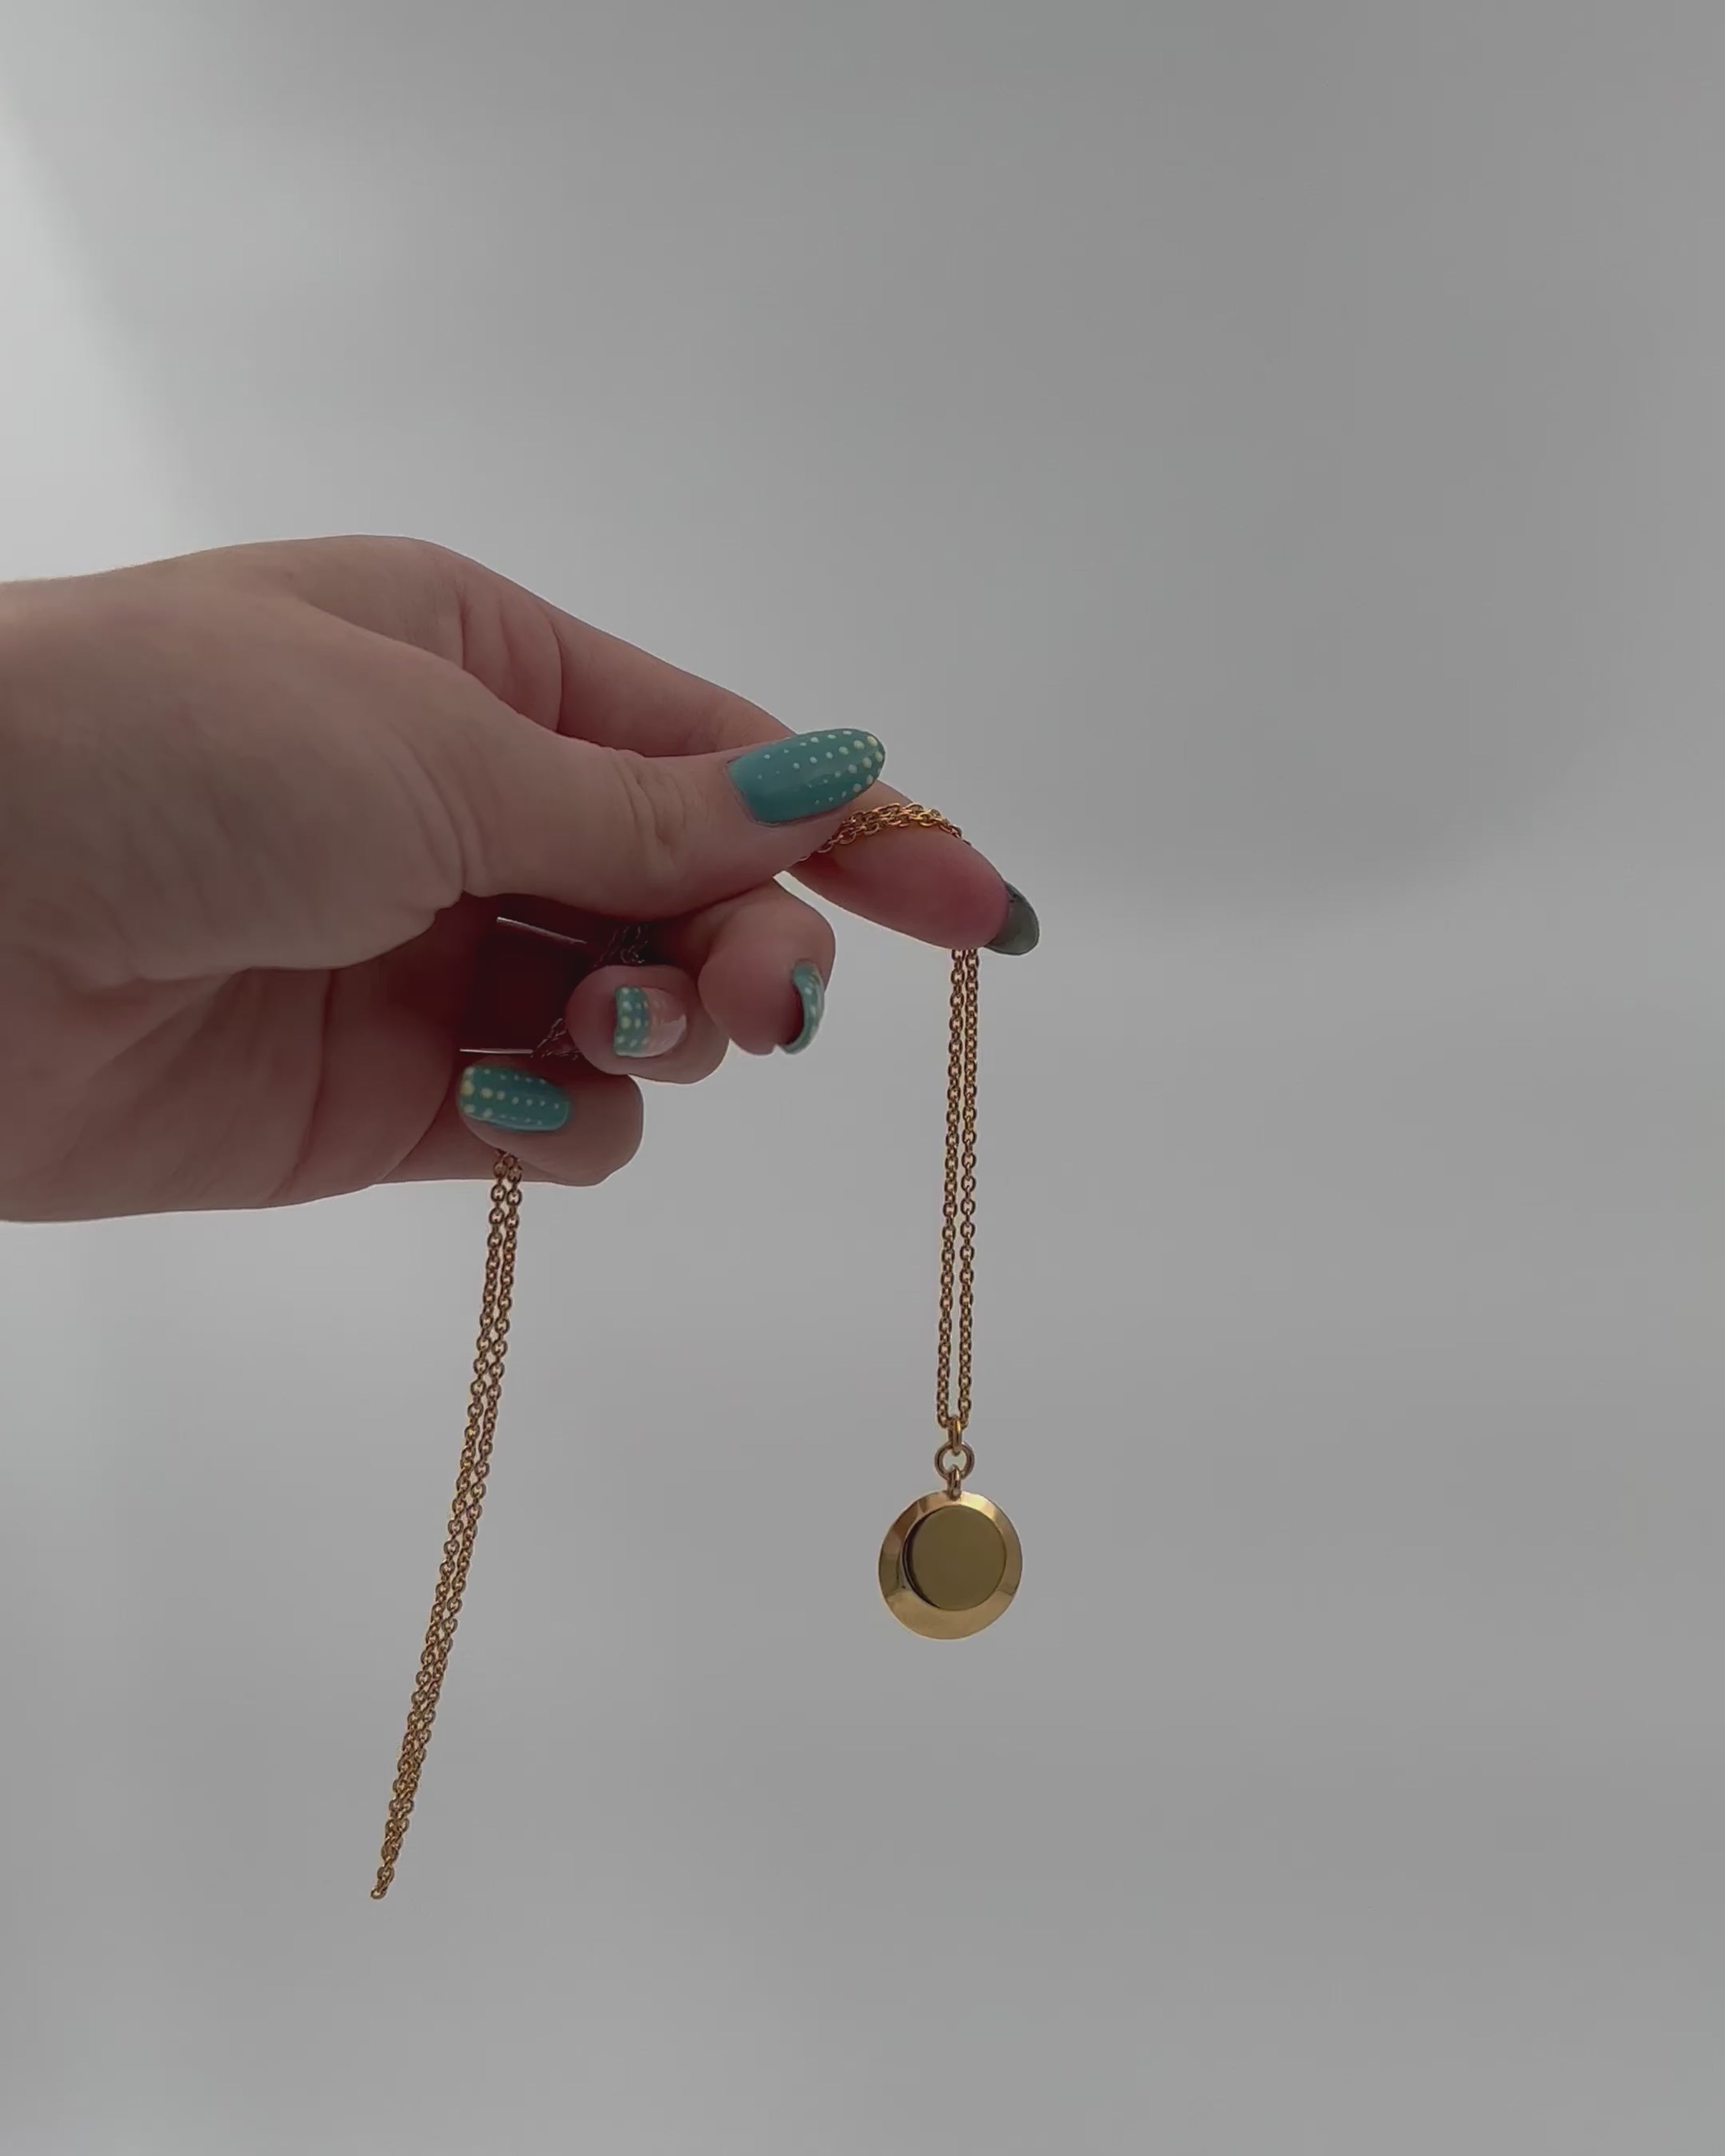 Profile Necklace - Sterling Silver &amp; Gold Plated